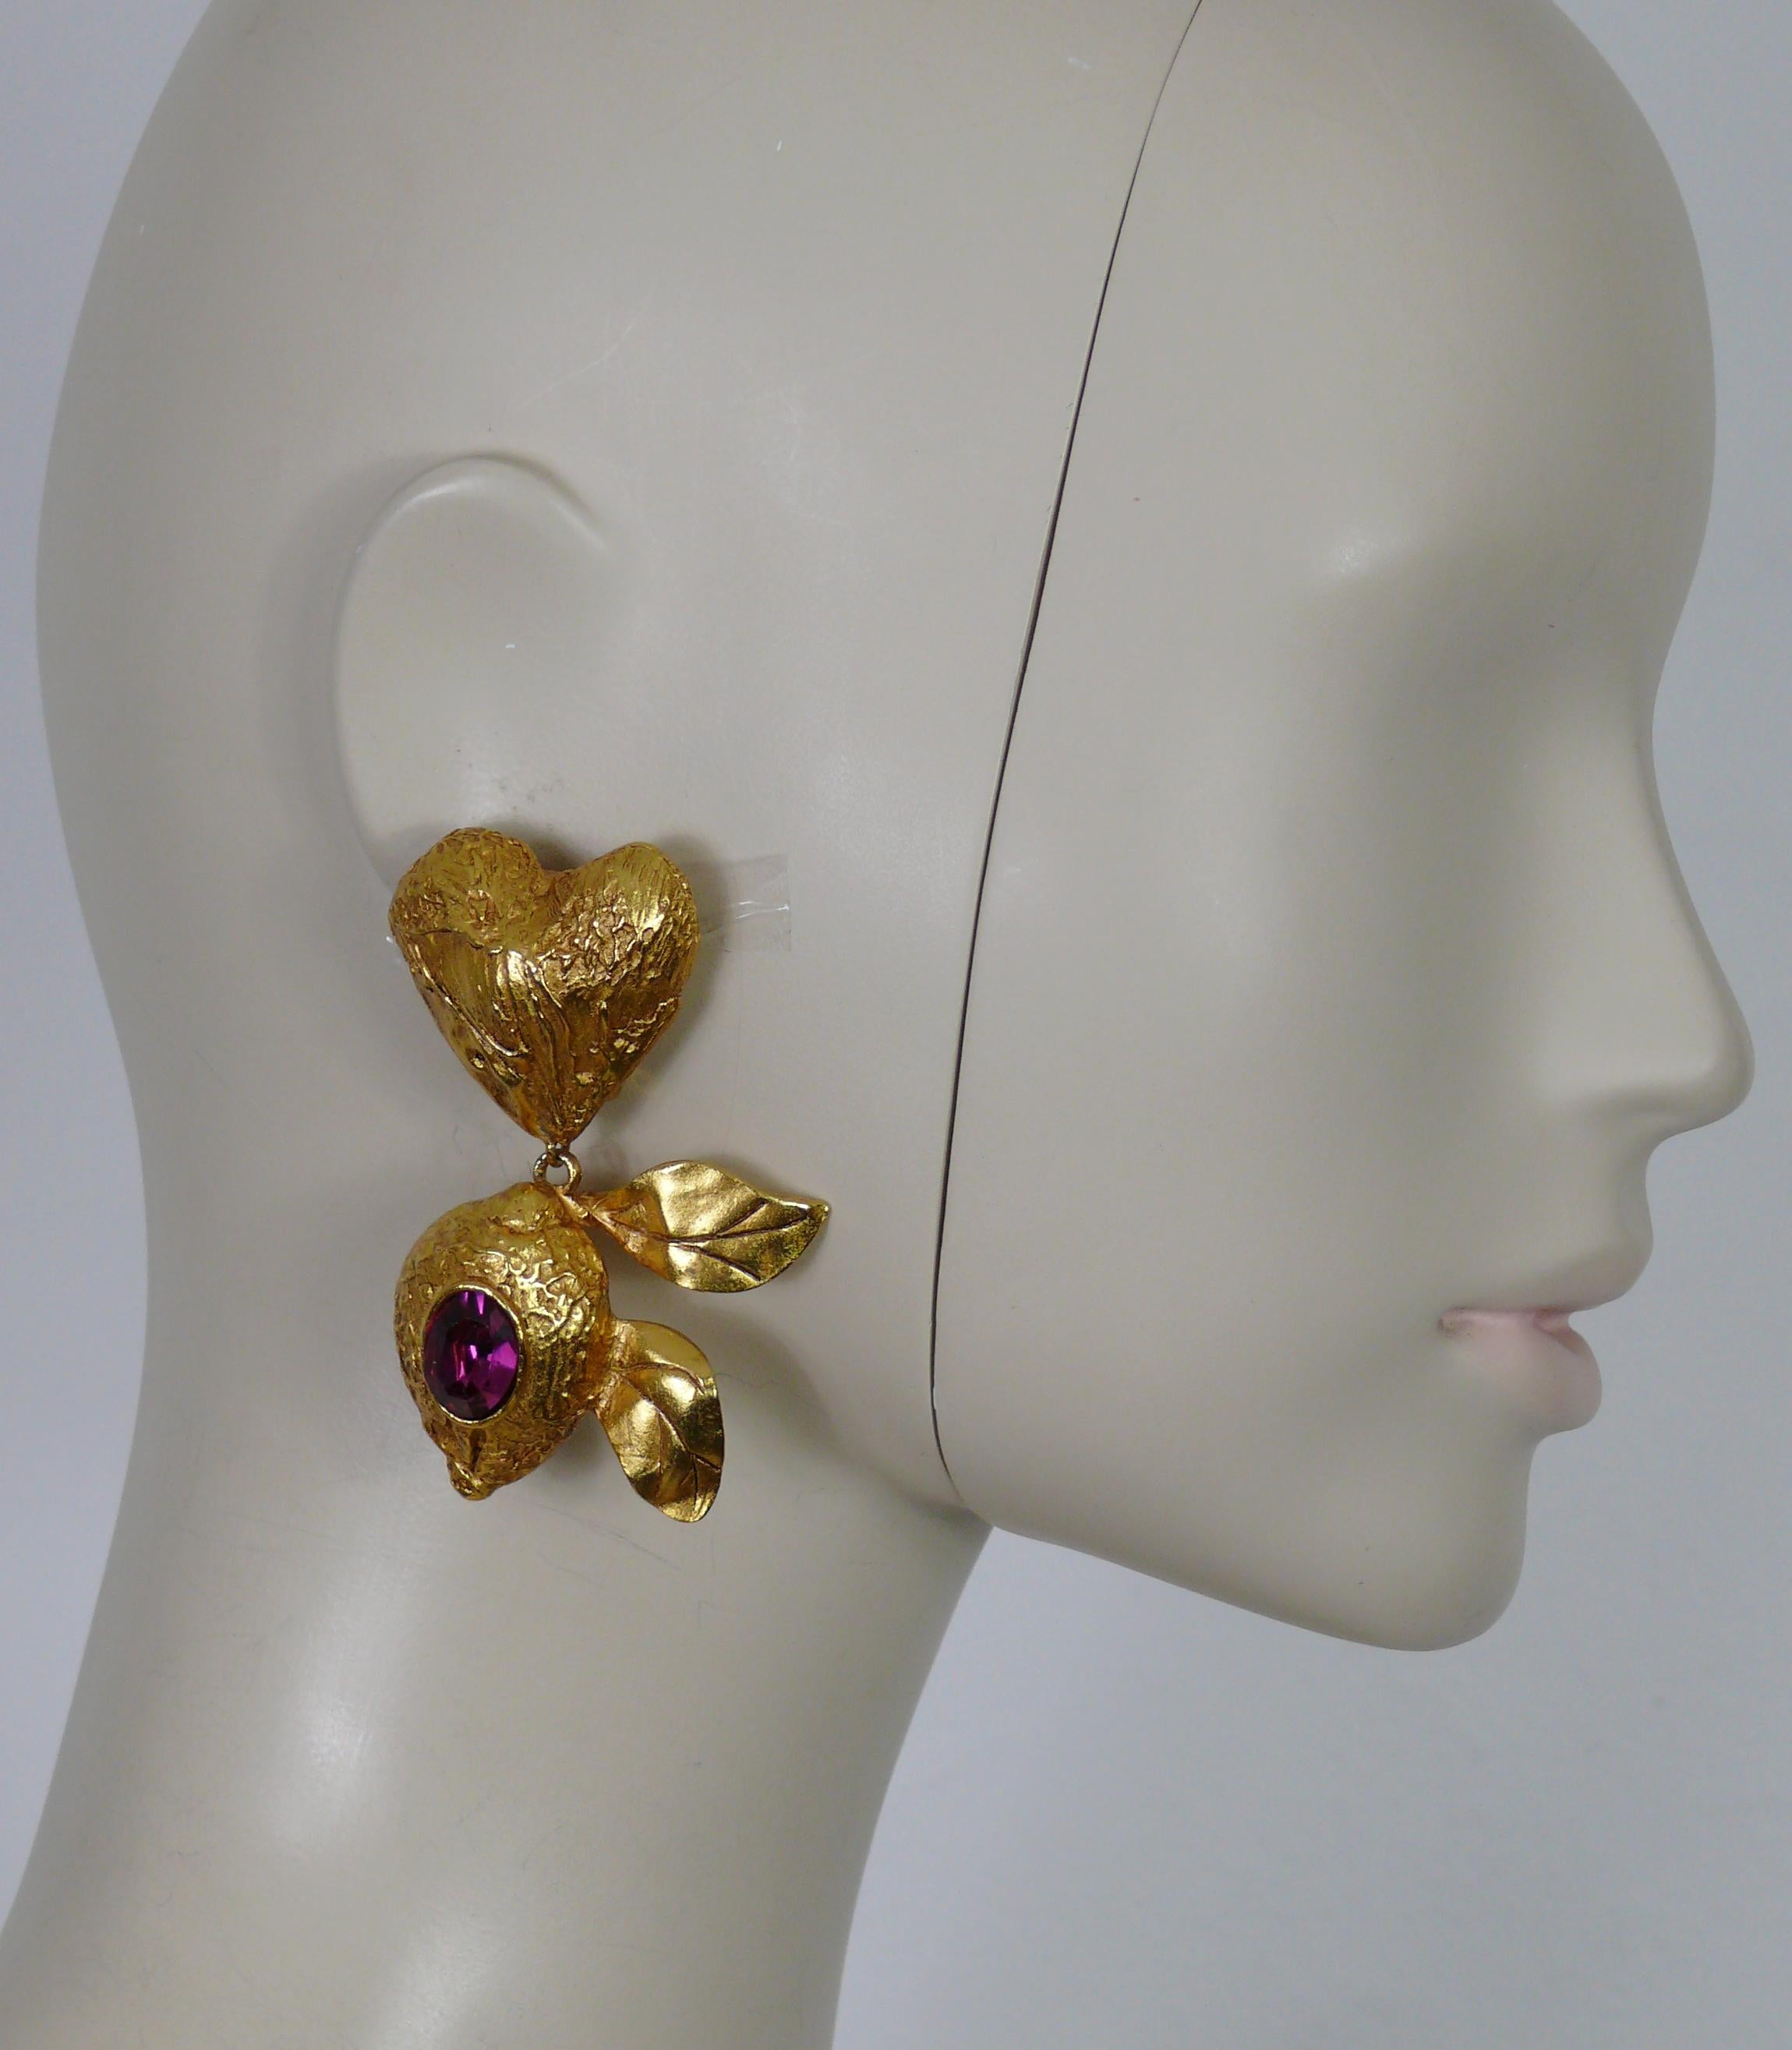 CHRISTIAN LACROIX vintage textured gold tone dangling earrings (clip-on) featuring a heart top and a lemon embellished with an oval fuchsia colour crystal.

Marked CHRISTIAN LACROIX CL Made in France.

Indicative measurements : max. height approx.